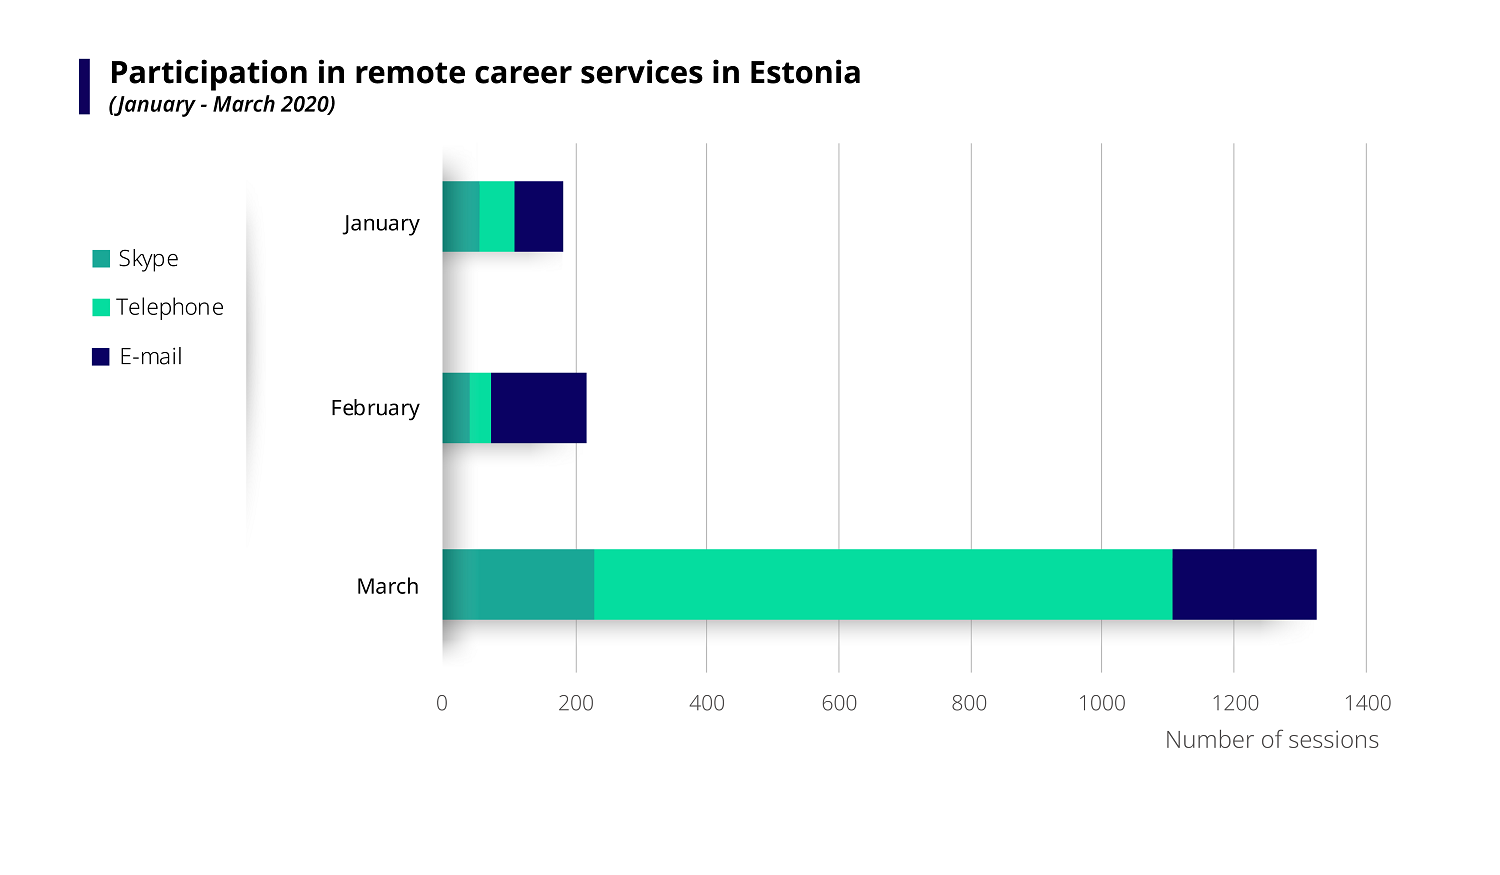 Chart showing the participation in remote career services in Estonia between January and March 2020, broken down by number of sessions on Skype, via telephone and e-mail